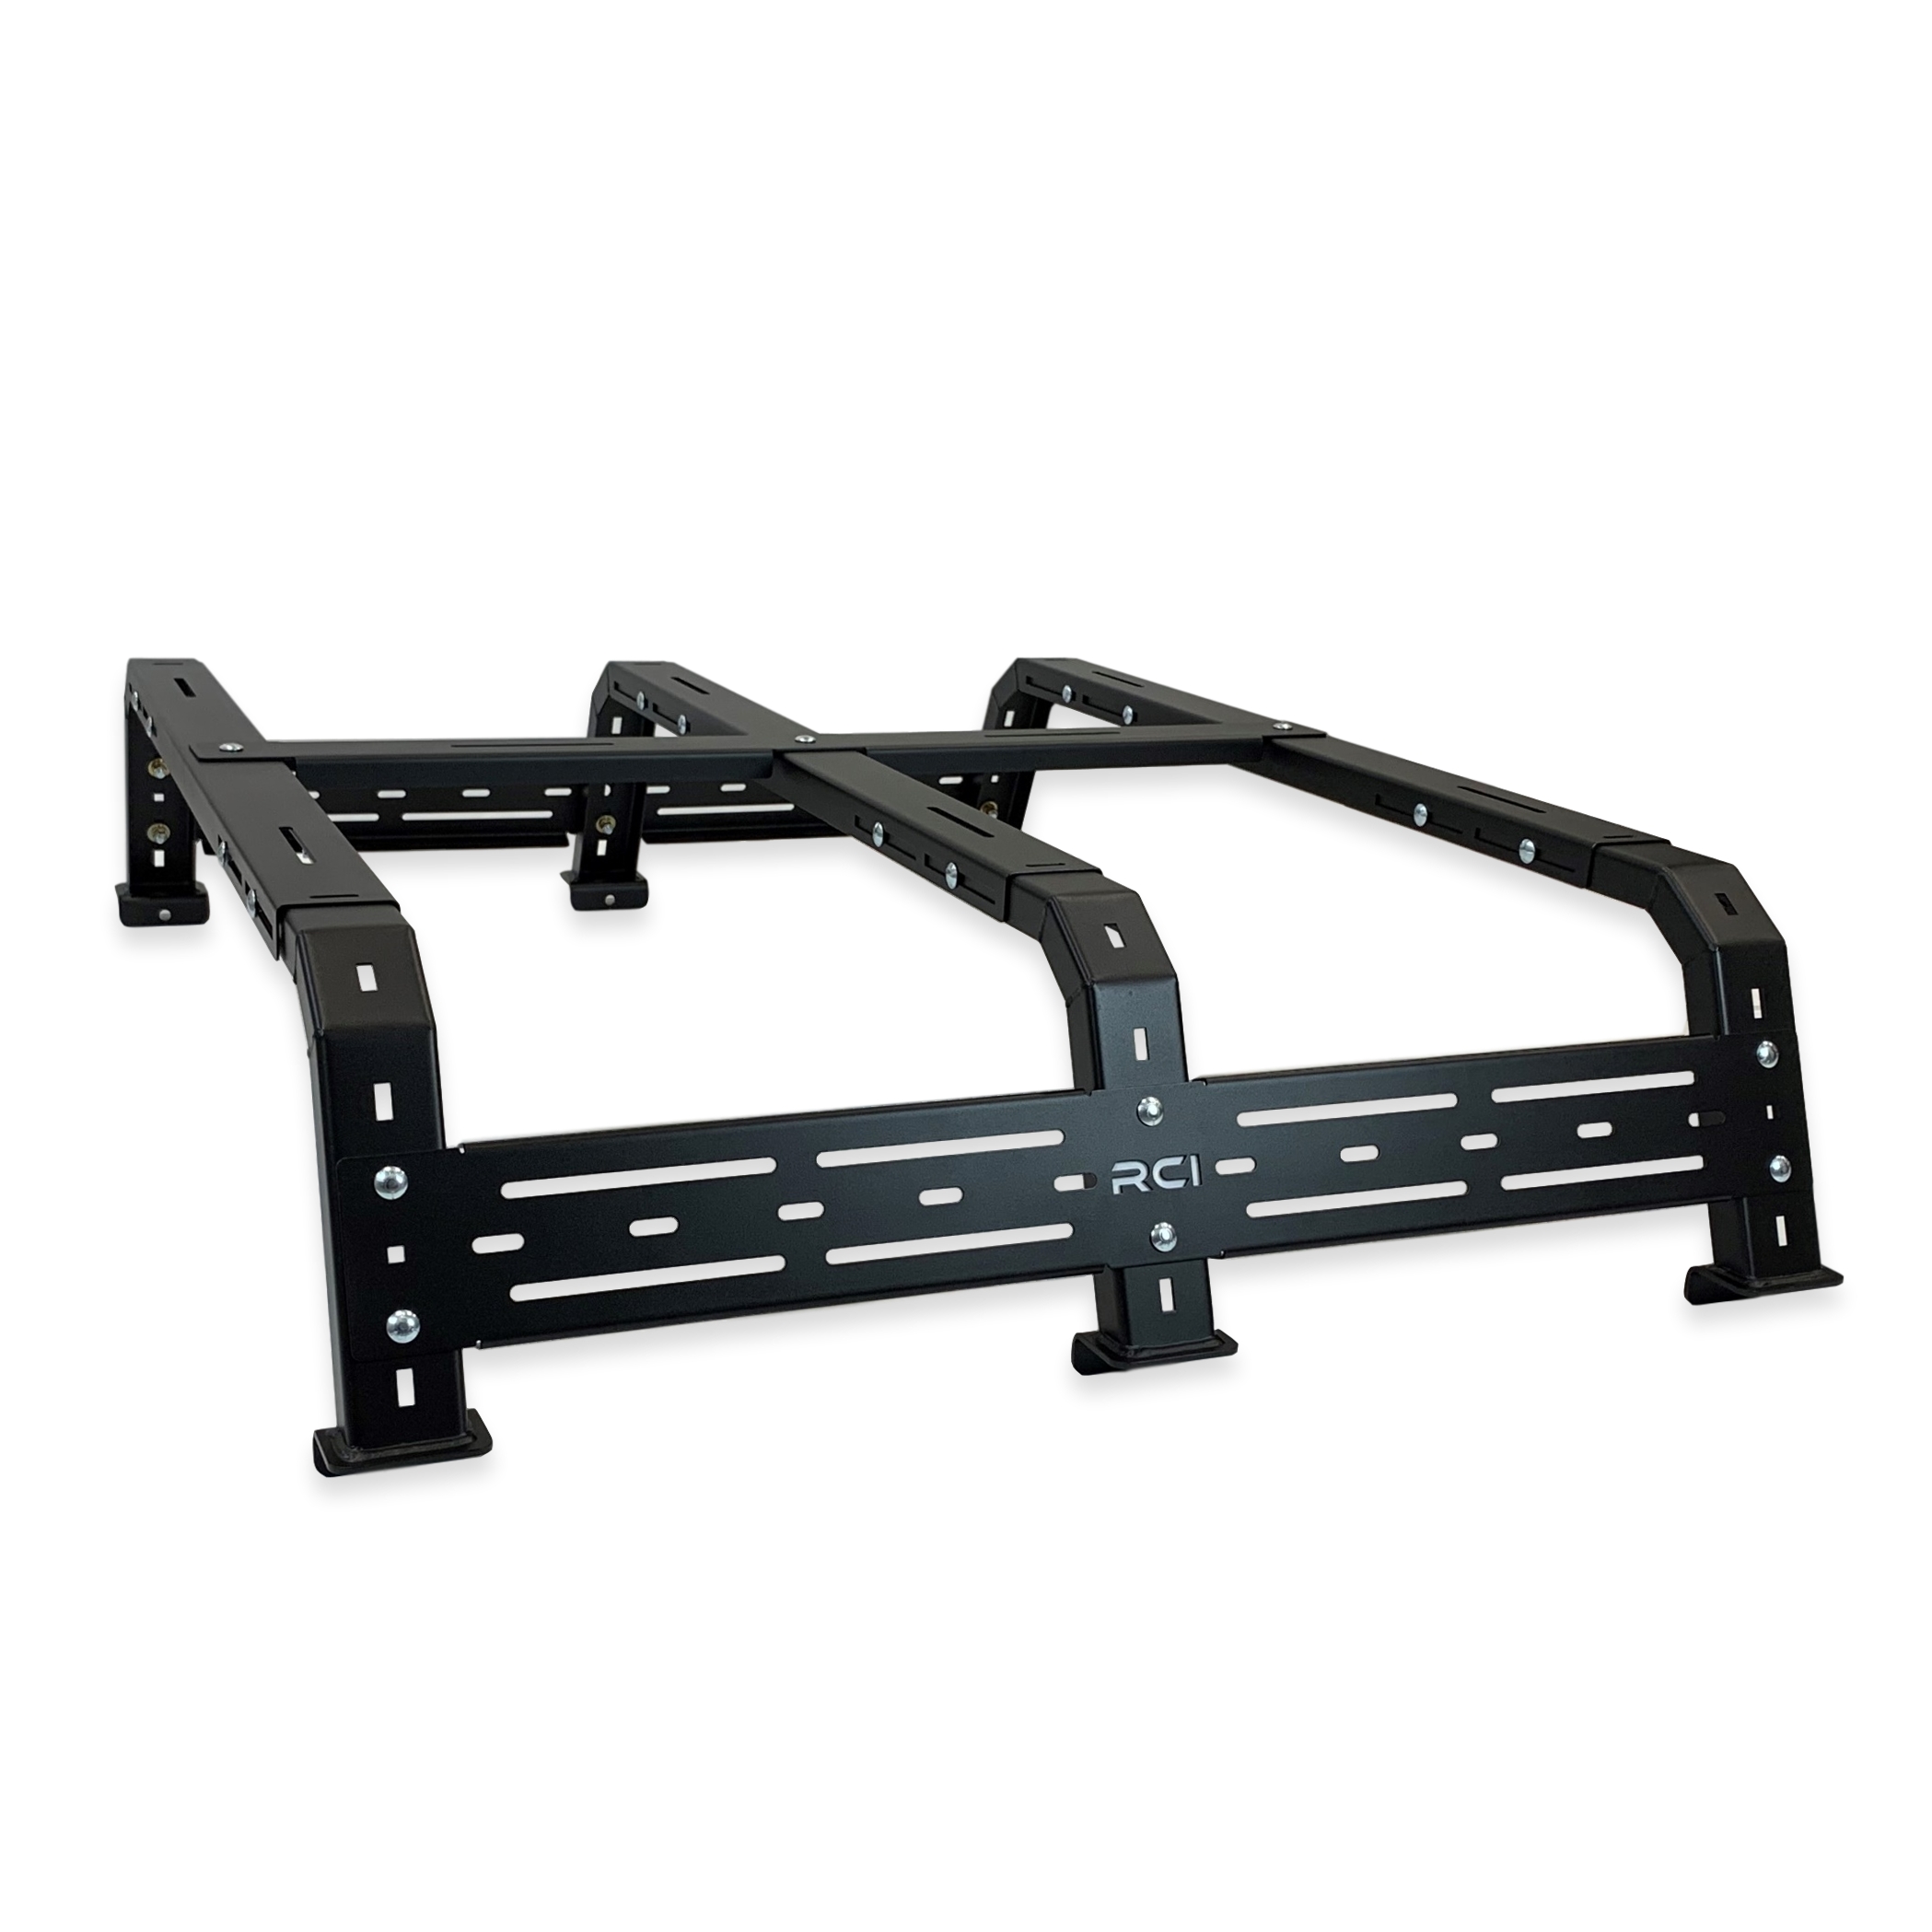 Featured image of post Modular Bed Rack System / The myrack is ideal for when: